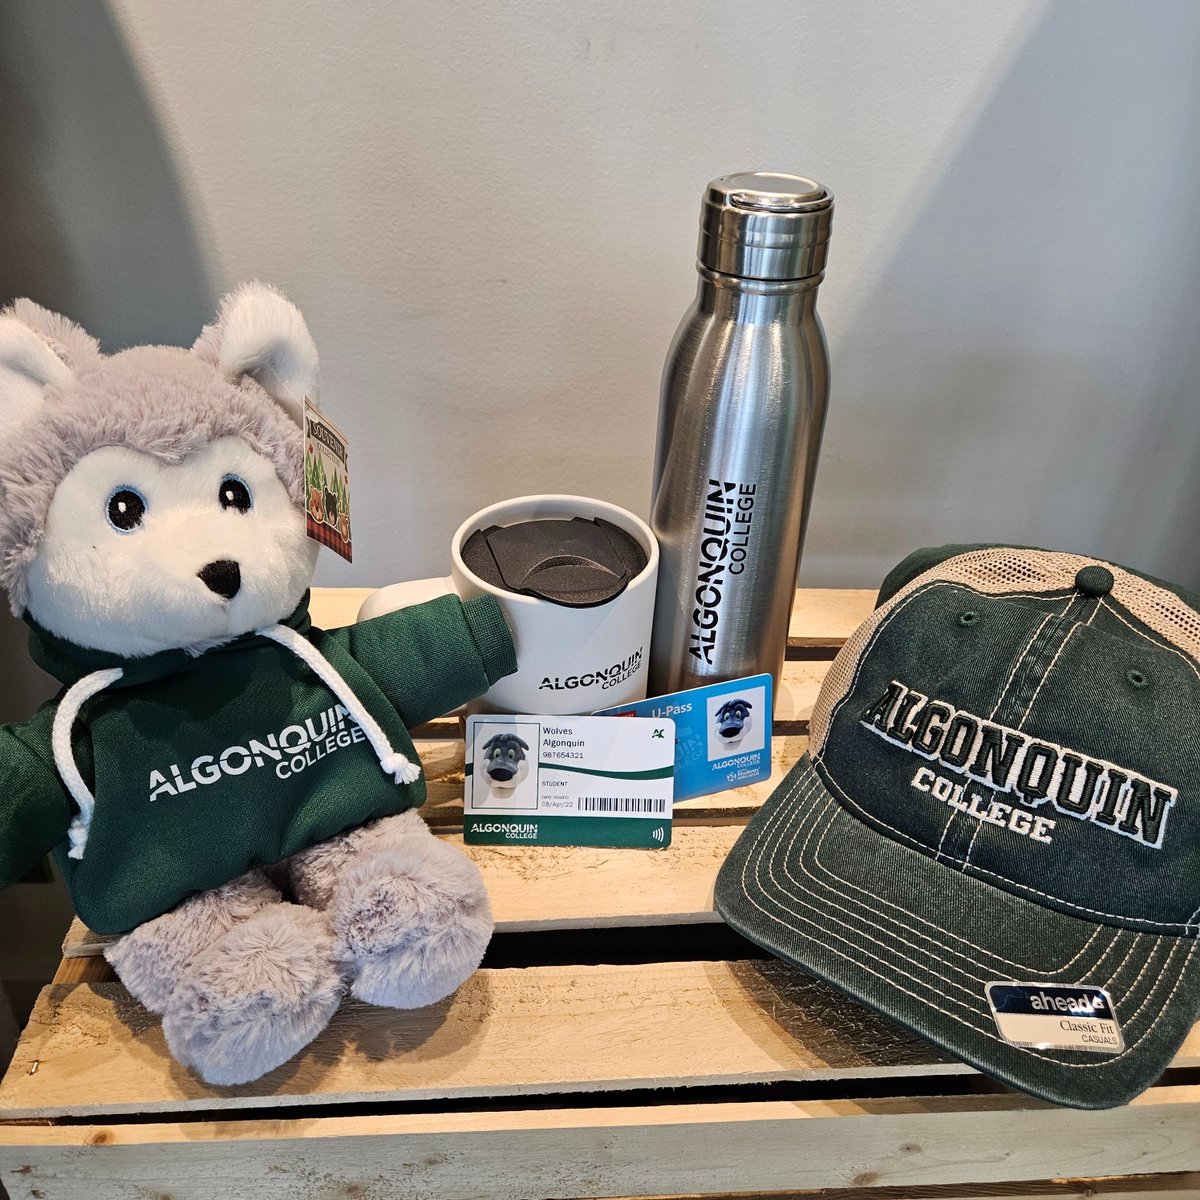 New @AlgonquinColleg students - get your AC Card and U-Pass! 🪪 The AC Card is your student Identification, and your U-Pass serves as your transit pass for OC Transpo and STO. 🚌 Click the link to get your cards! 📸 bit.ly/349mRBS #AlgonquinCollege